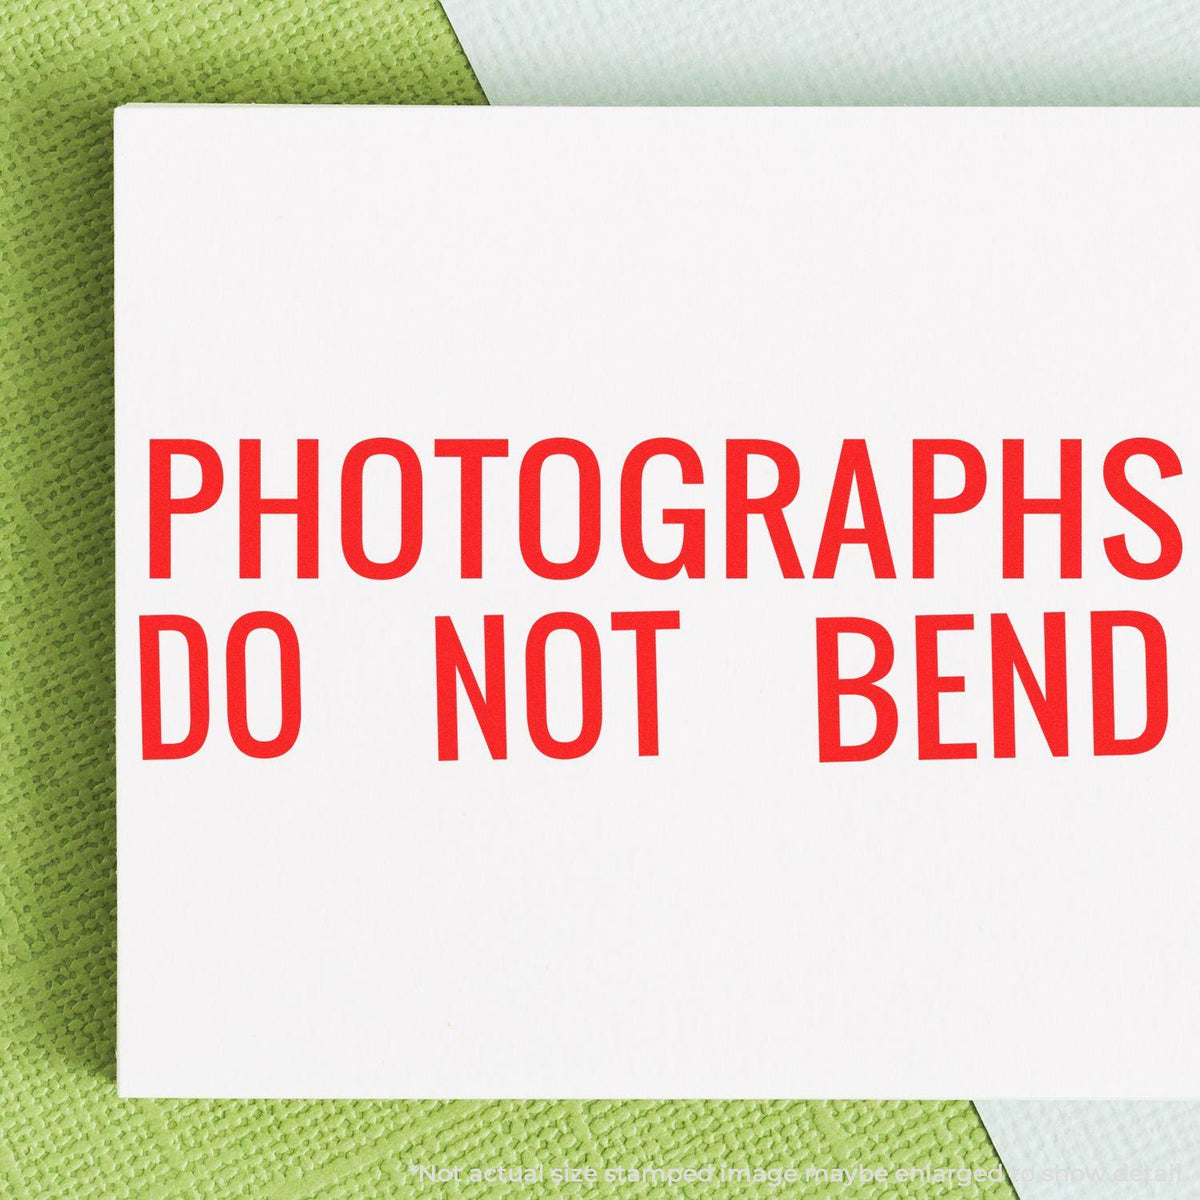 In Use Large Photographs Do Not Bend Rubber Stamp Image